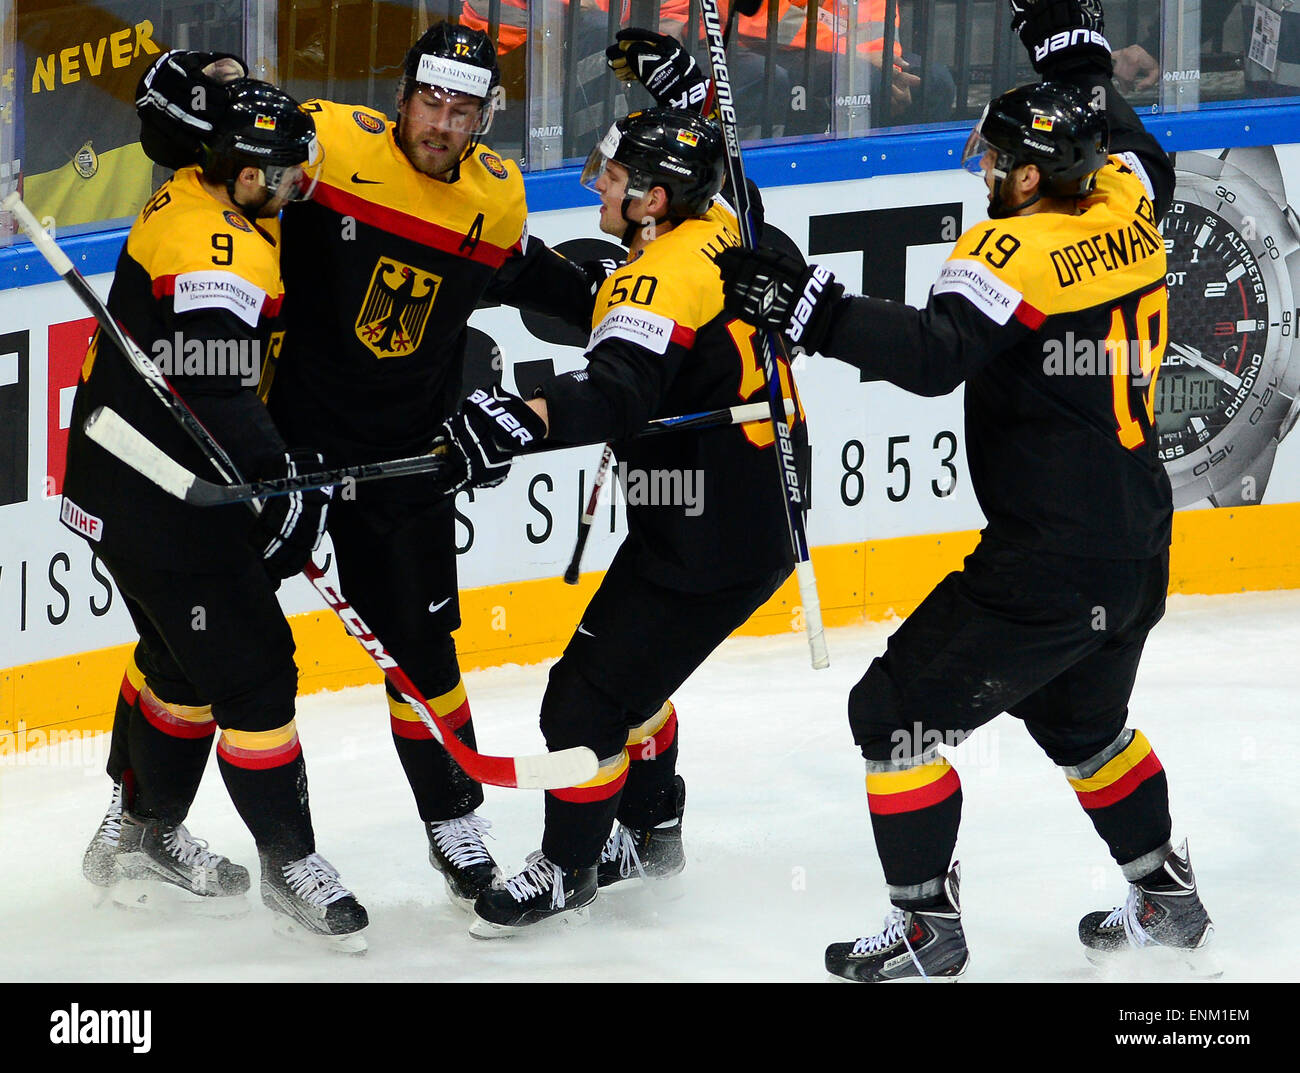 Prague, Czech Republic. 7th May, 2015. Second from left German forward Marcus Kink celebrates with his teammates goal during the Ice Hockey World Championship Group A match Sweden vs Germany in Prague, Czech Republic, May 7, 2015. © Roman Vondrous/CTK Photo/Alamy Live News Stock Photo